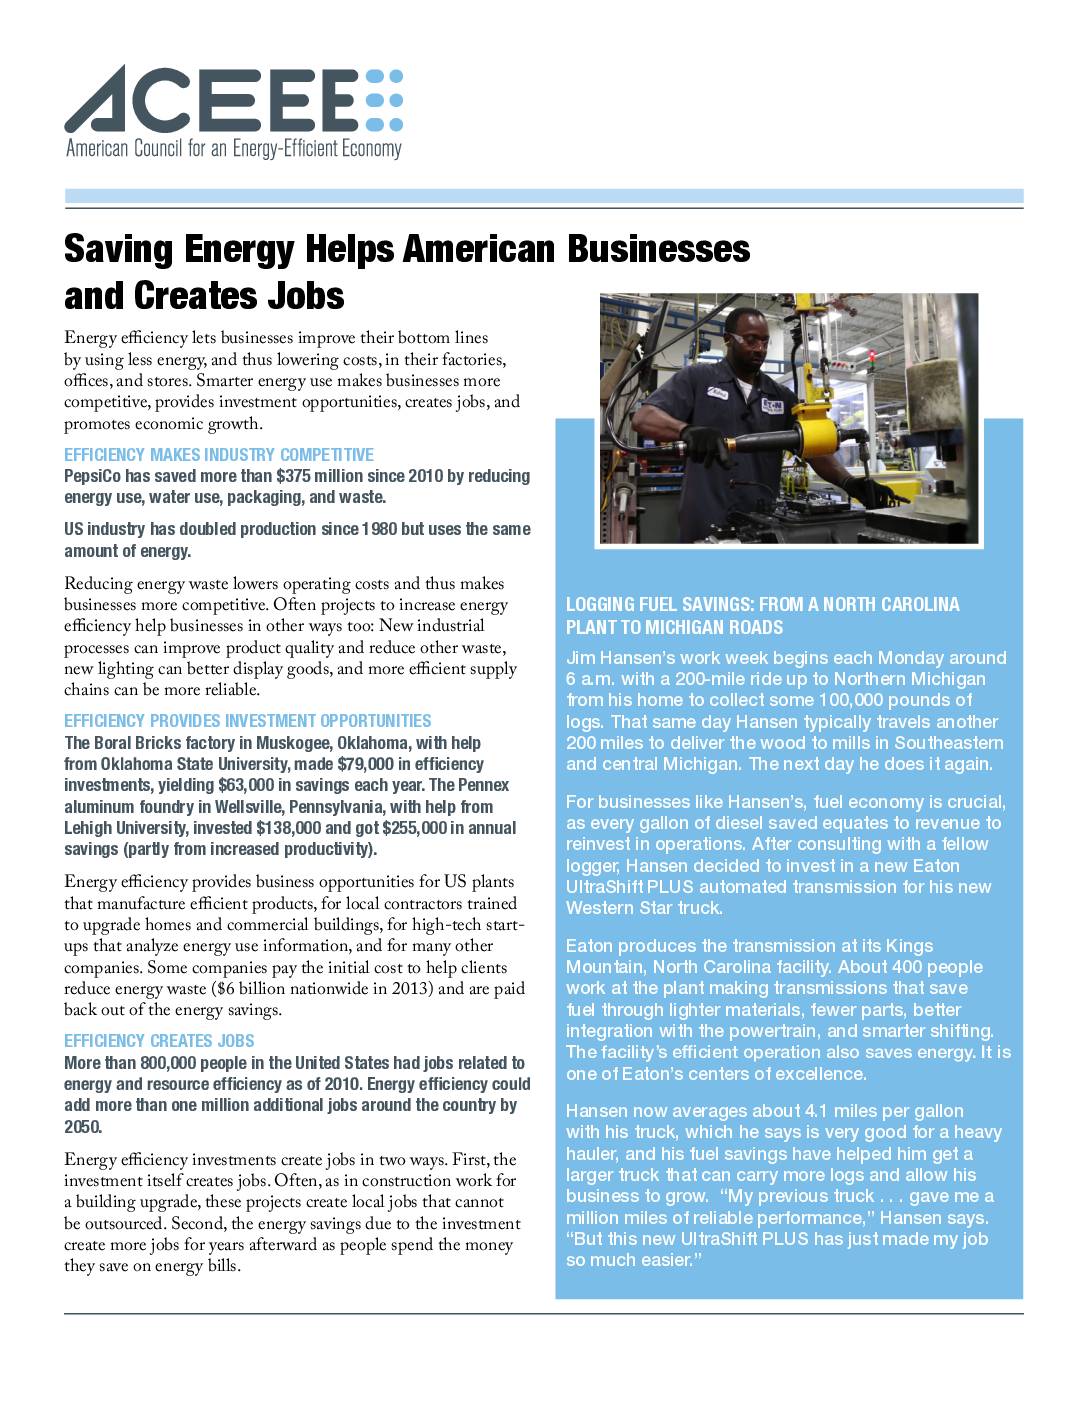 Saving Energy Helps American Businesses and Creates Jobs